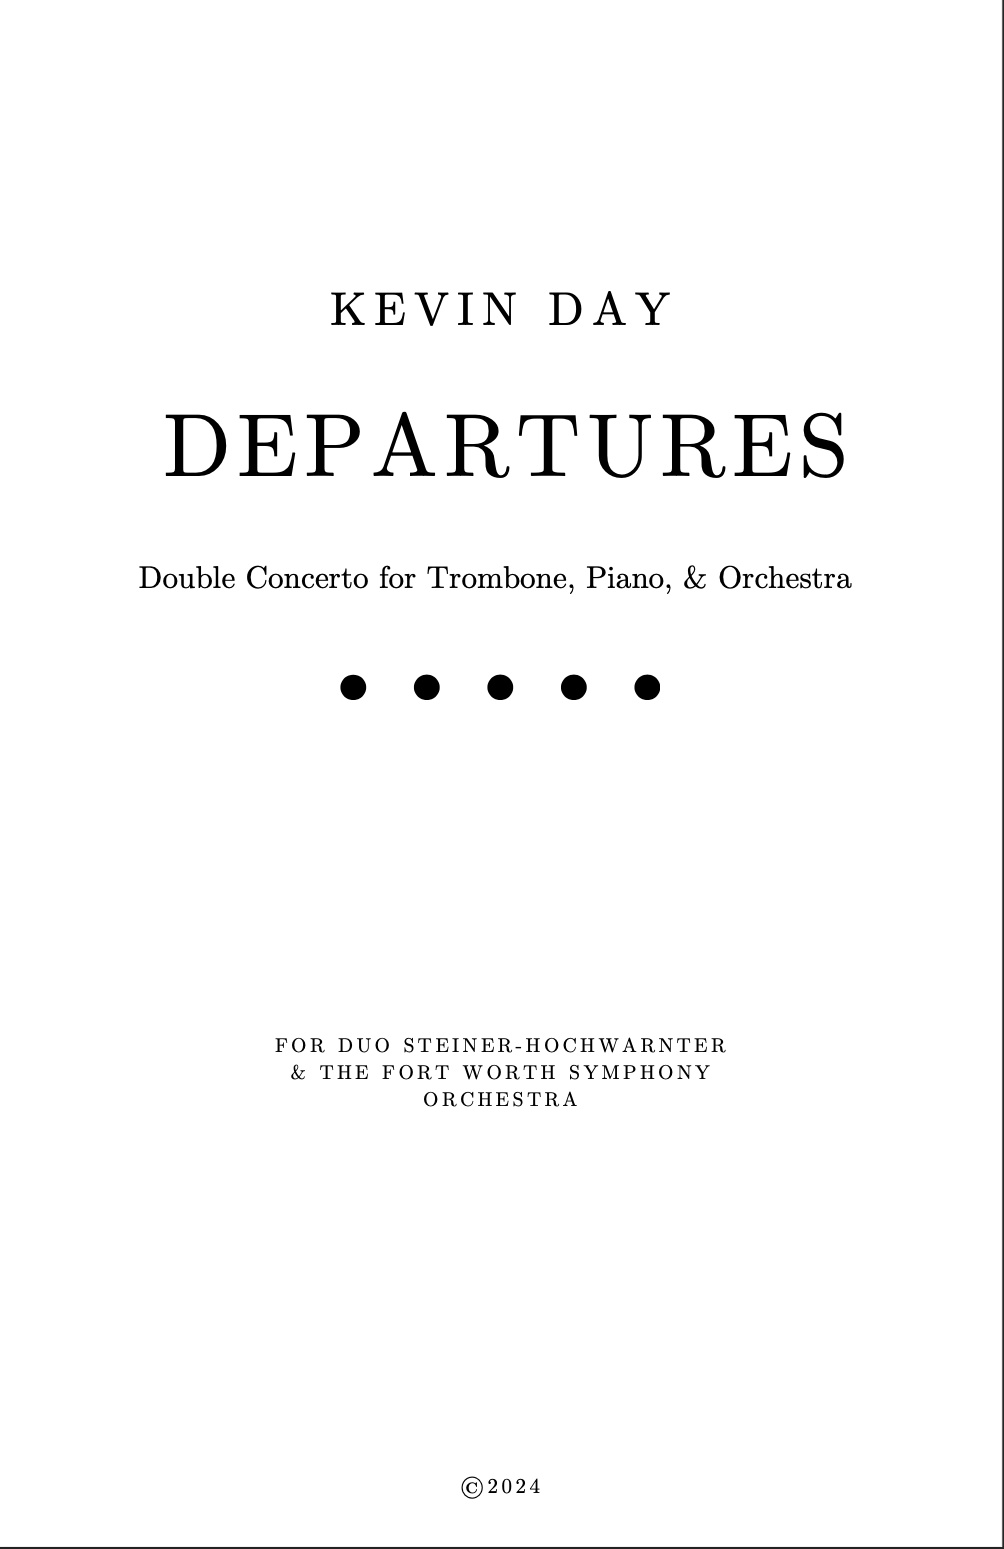 Departures (Piano Solo Part) by Kevin Day